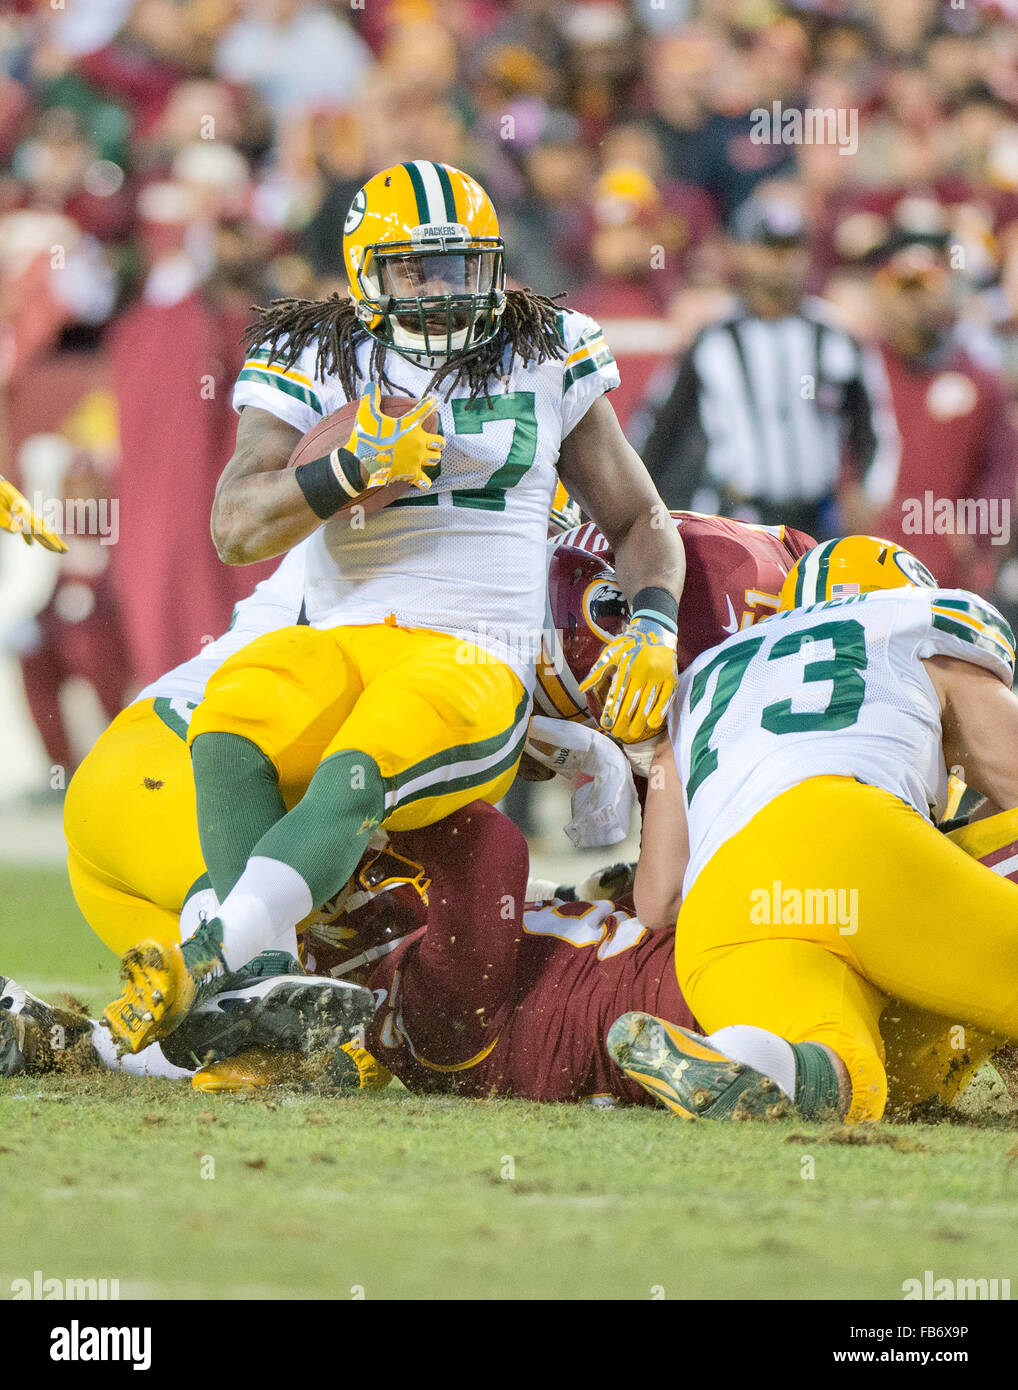 Meme This Best Pics  Green bay football, Eddie lacy, Cool pictures